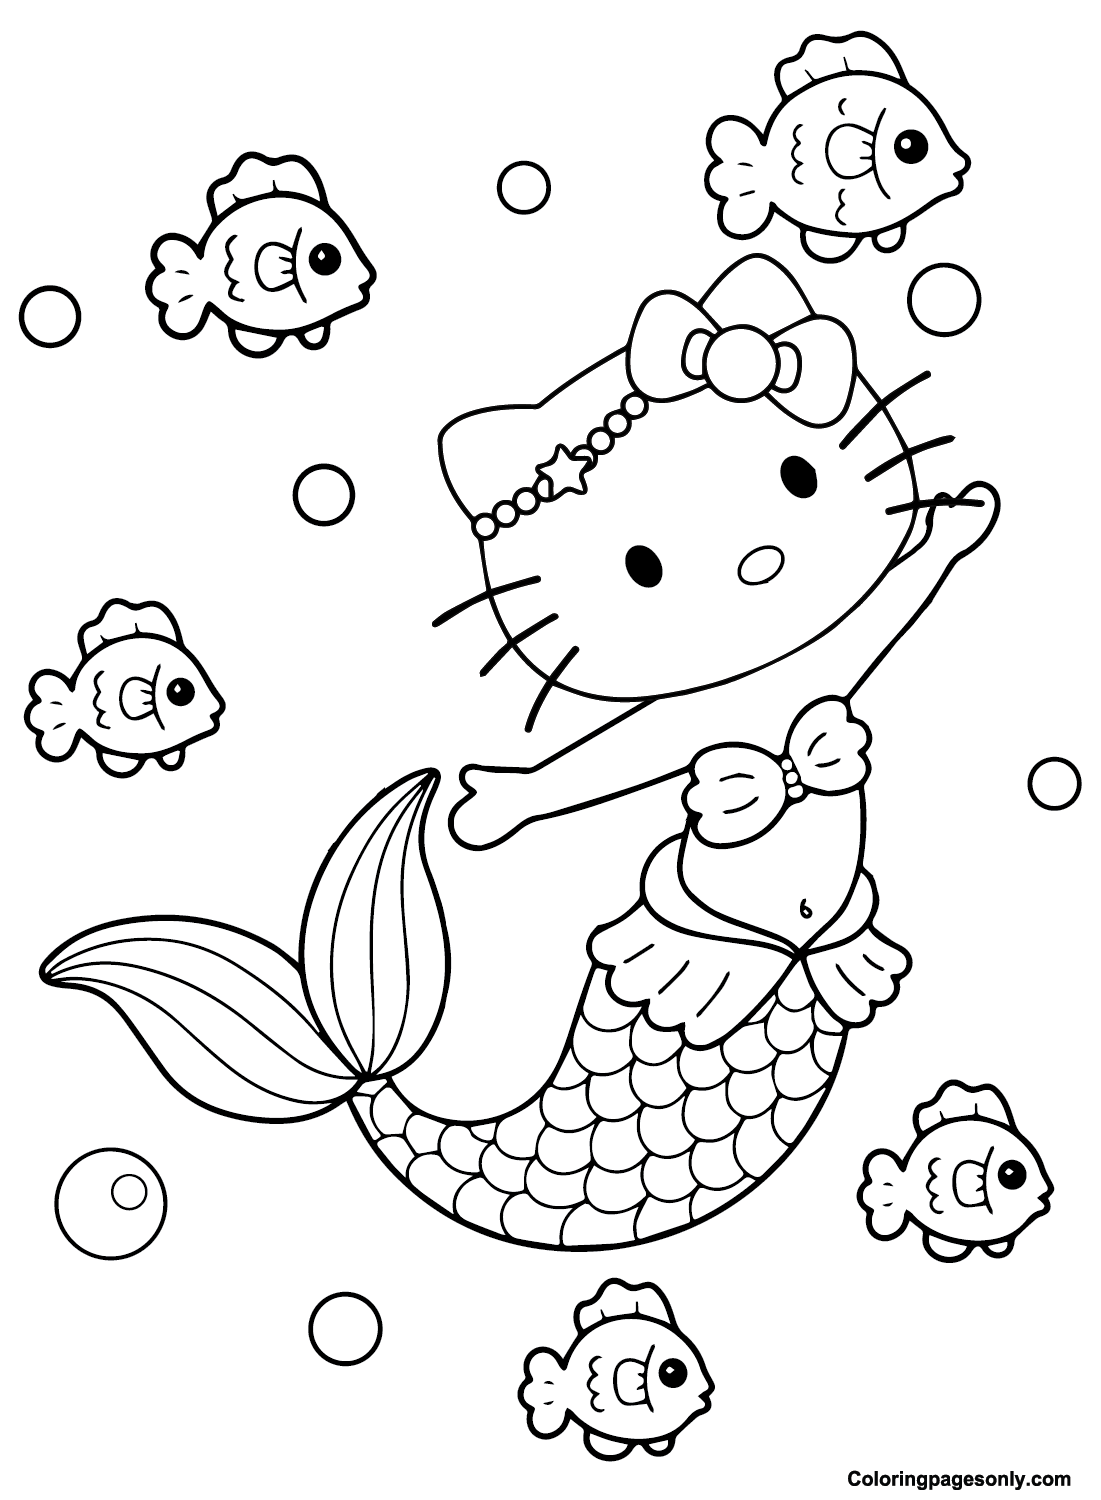 mermaids-swimming-hello-kitty-mermaid-coloring-pages-beautiful-coloring-home